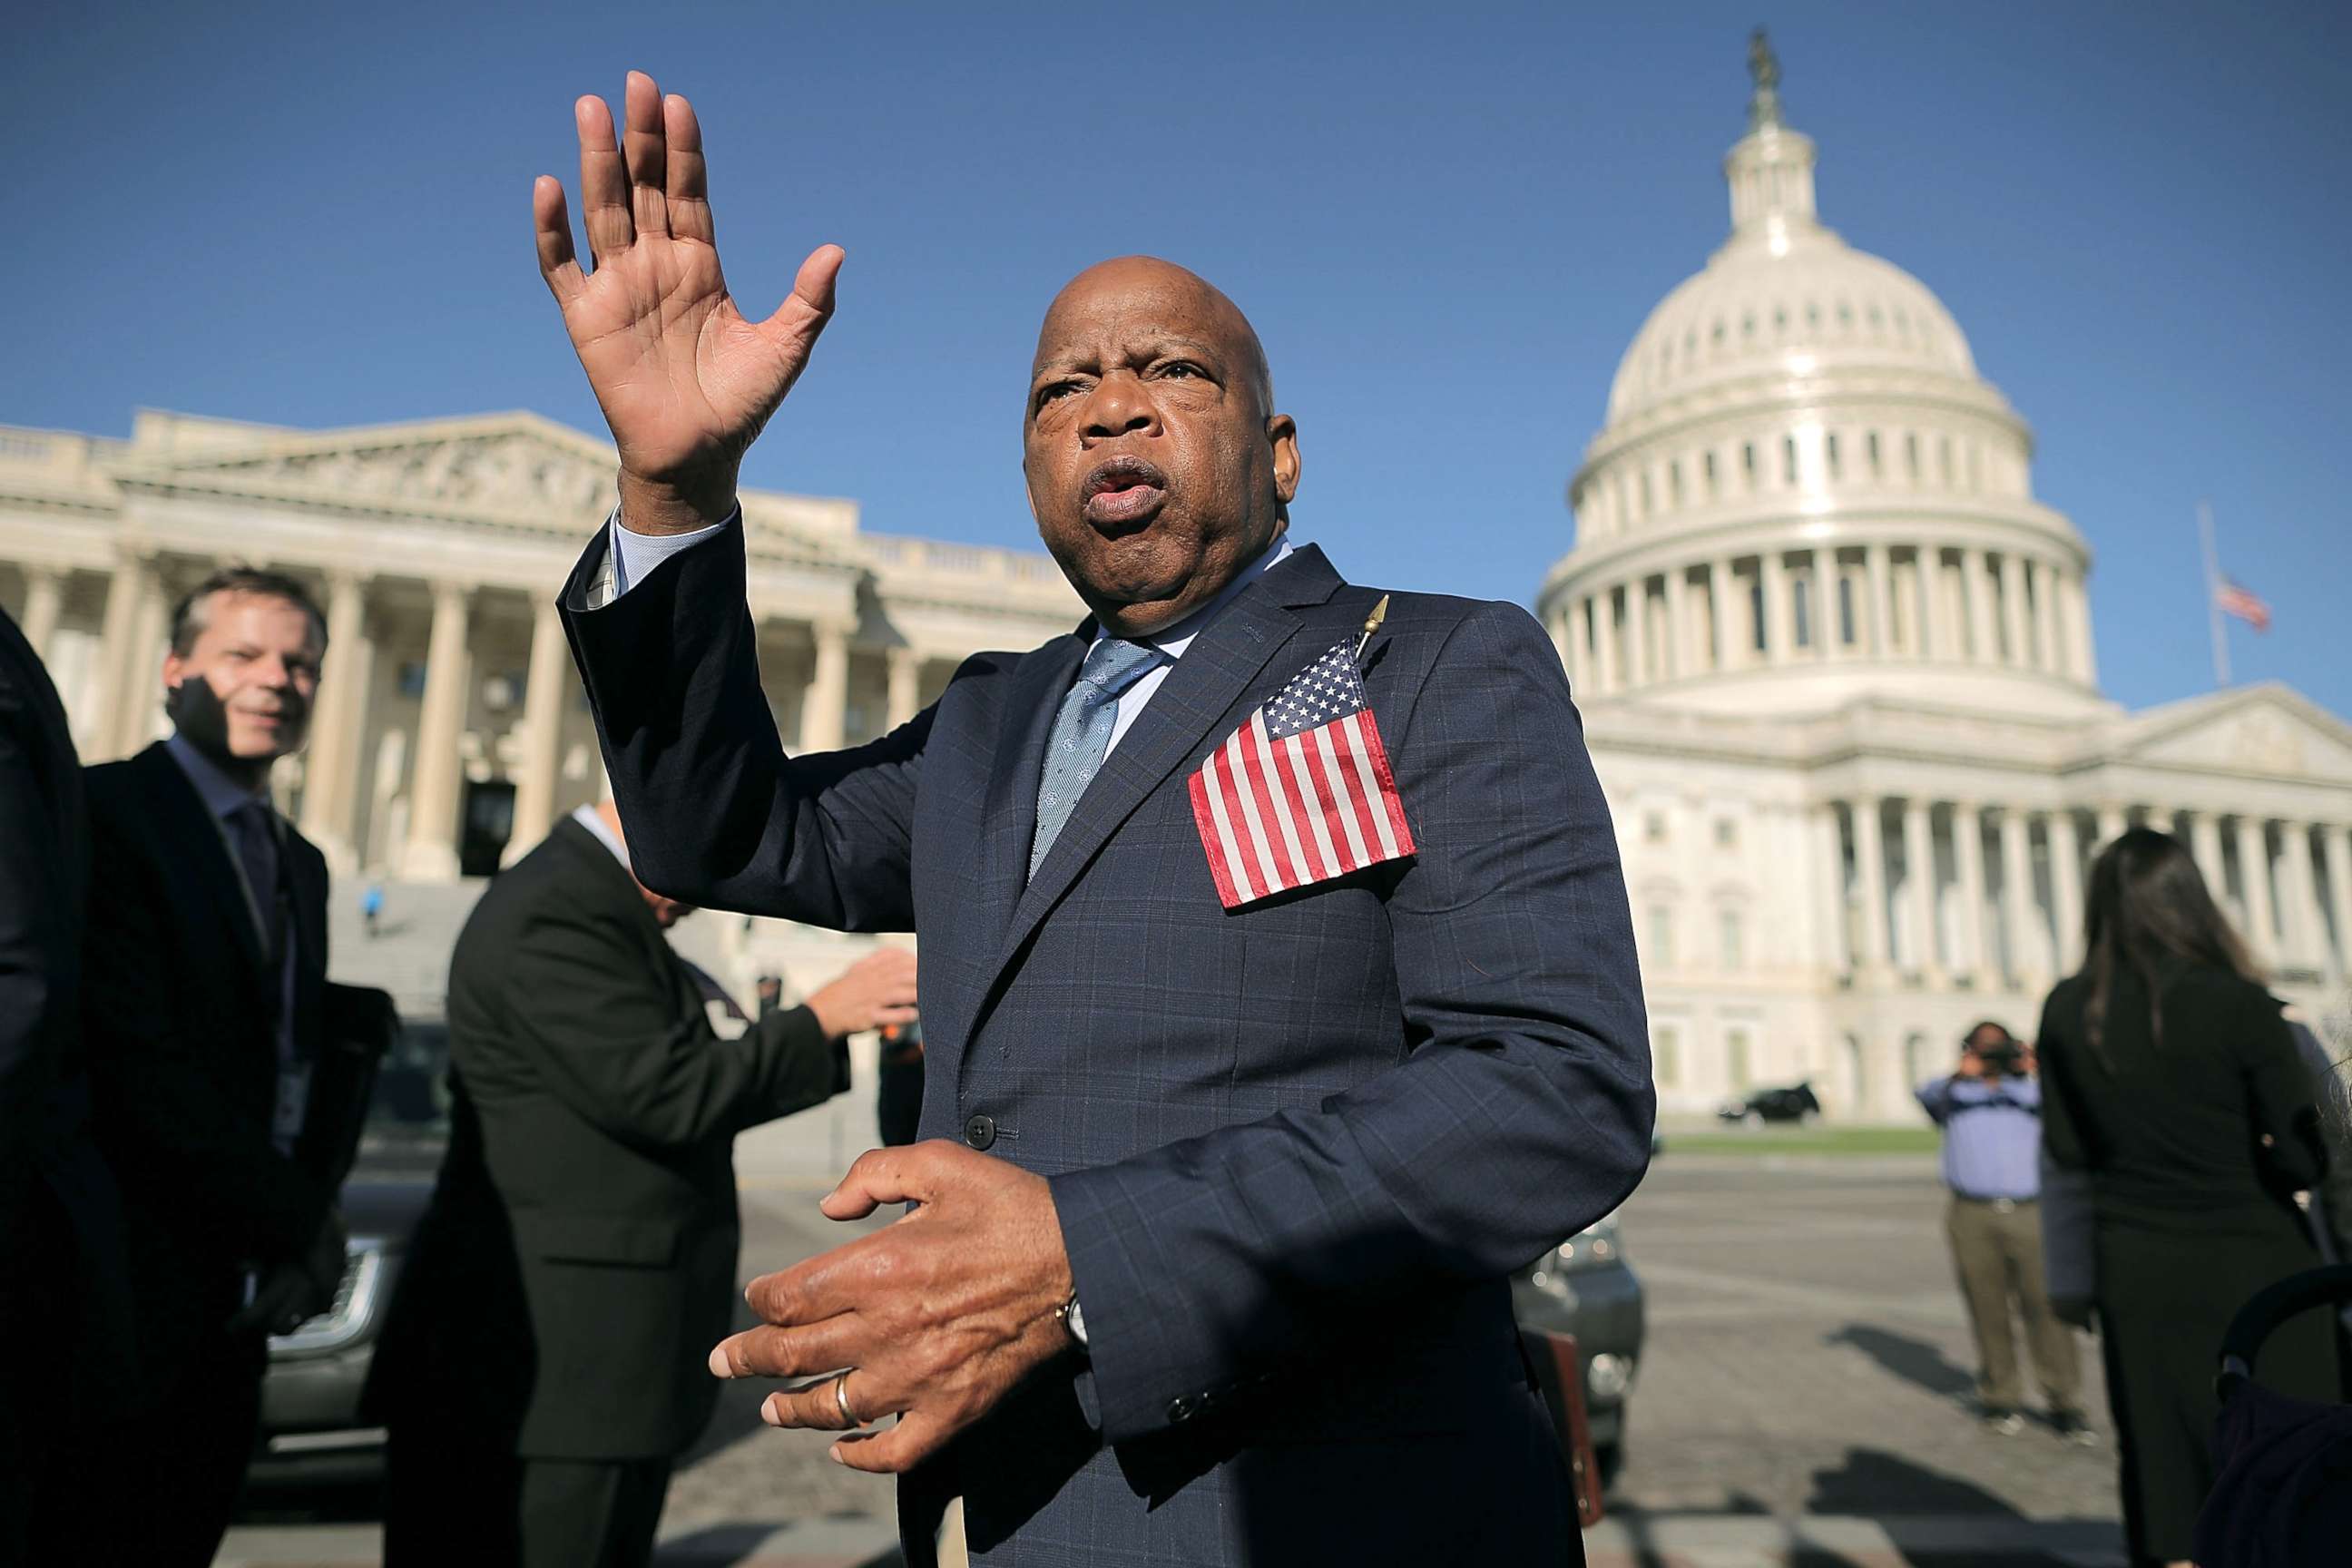 PHOTO: Rep. John Lewis thanks anti-gun violence supporters following a rally with fellow Democrats on the East Front steps of the U.S. House of Representatives, Oct. 4, 2017, in Washington, DC.